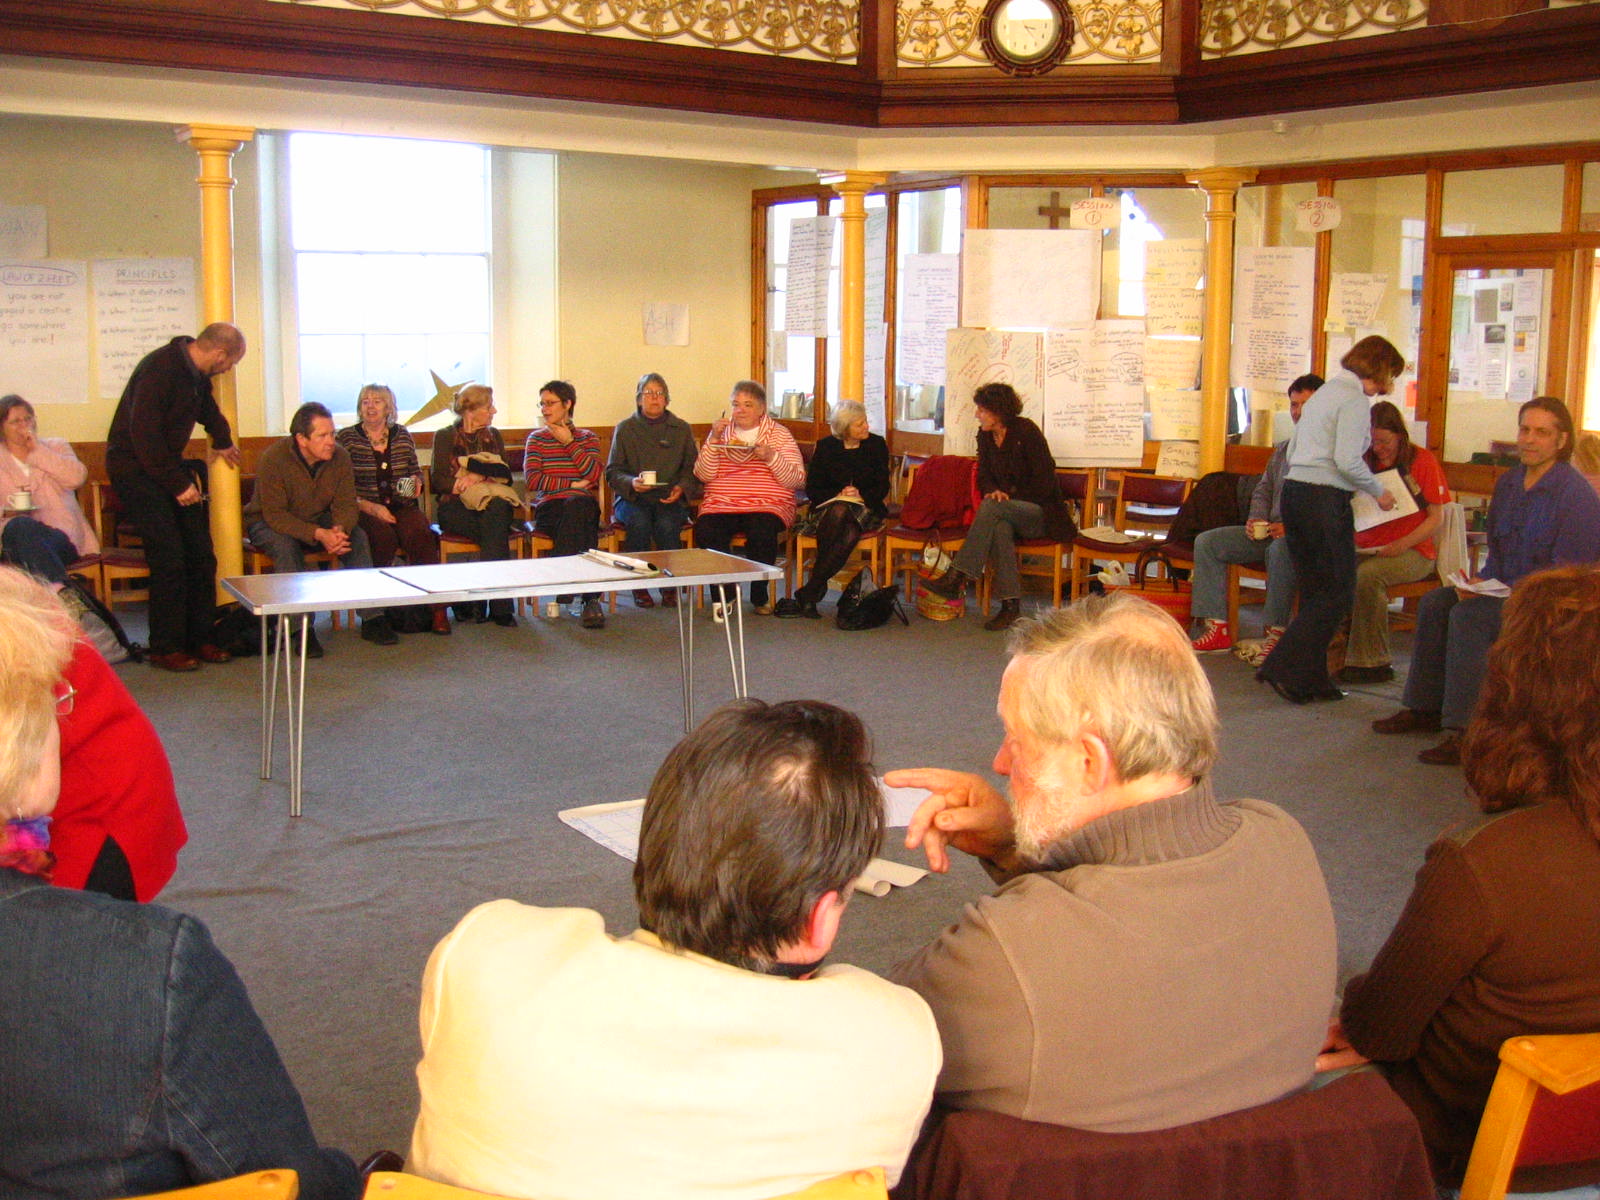 Photograph taken at the Climate Action Group Open Space workshop on 9th February 2008